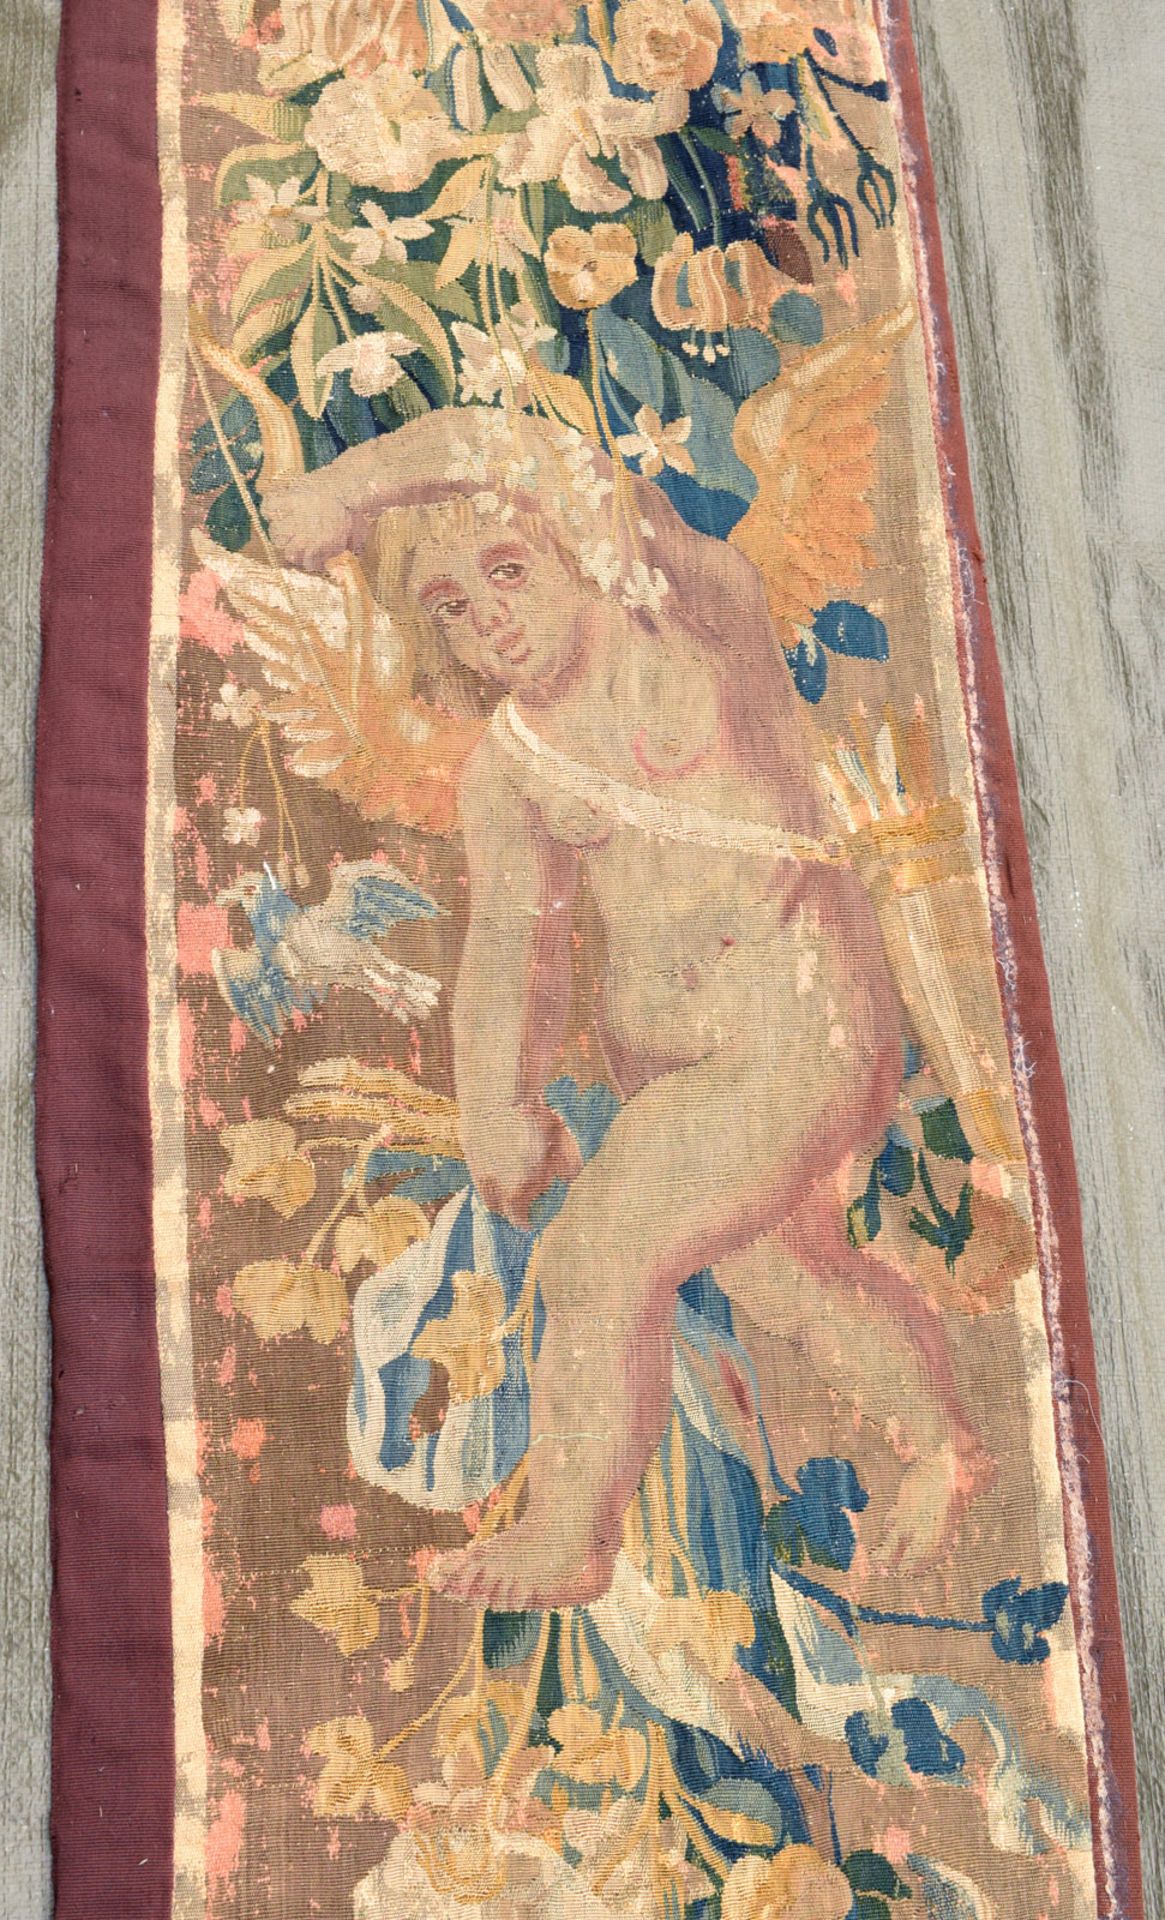 A TAPESTRY BORDER FRAGMENT USED AS A DOOR FRAME DECORATION - Image 2 of 10